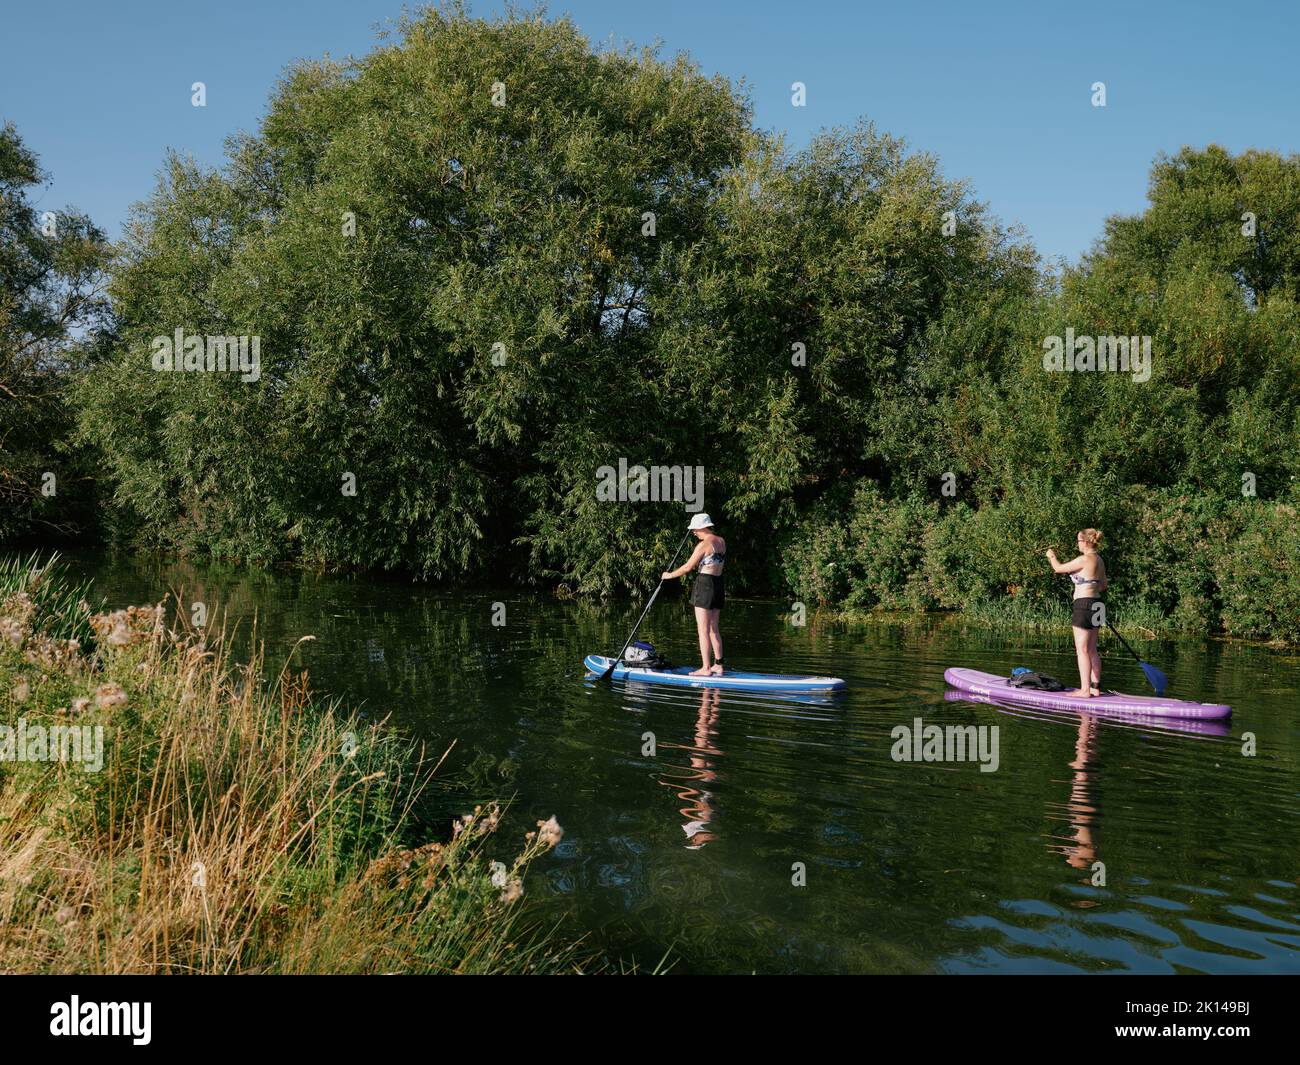 Summer paddleboarding Grantchester Meadows on the River Cam in Cambridge Cambridgeshire England UK - summertime countryside  people paddleboarder sup Stock Photo